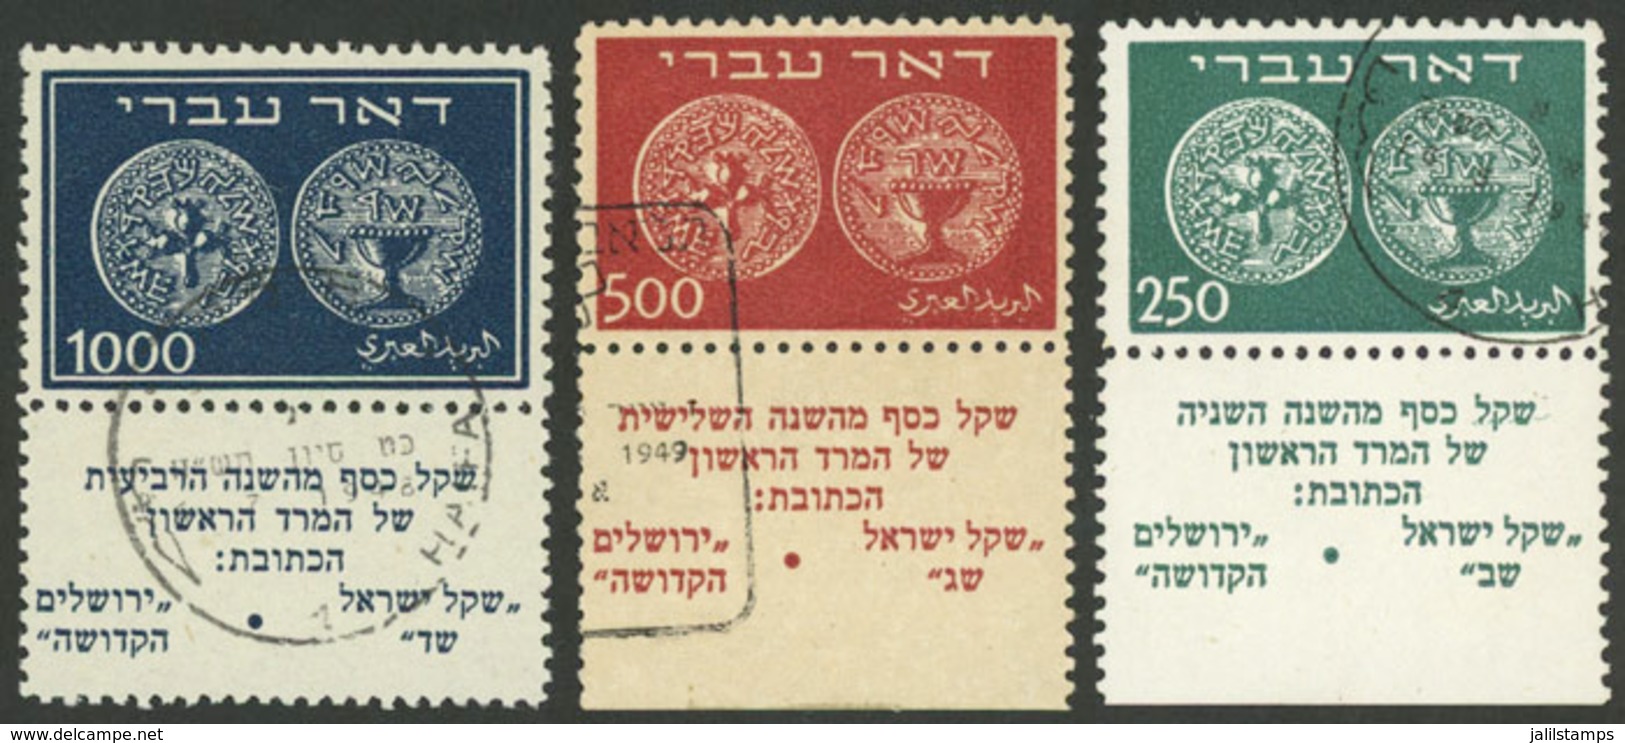 ISRAEL: Yvert 7/9, 1948 The 3 High Values Of The Coins Set, Used, With Tabs, Very Handsome, Catalog Value Euros 5,500. - Used Stamps (with Tabs)